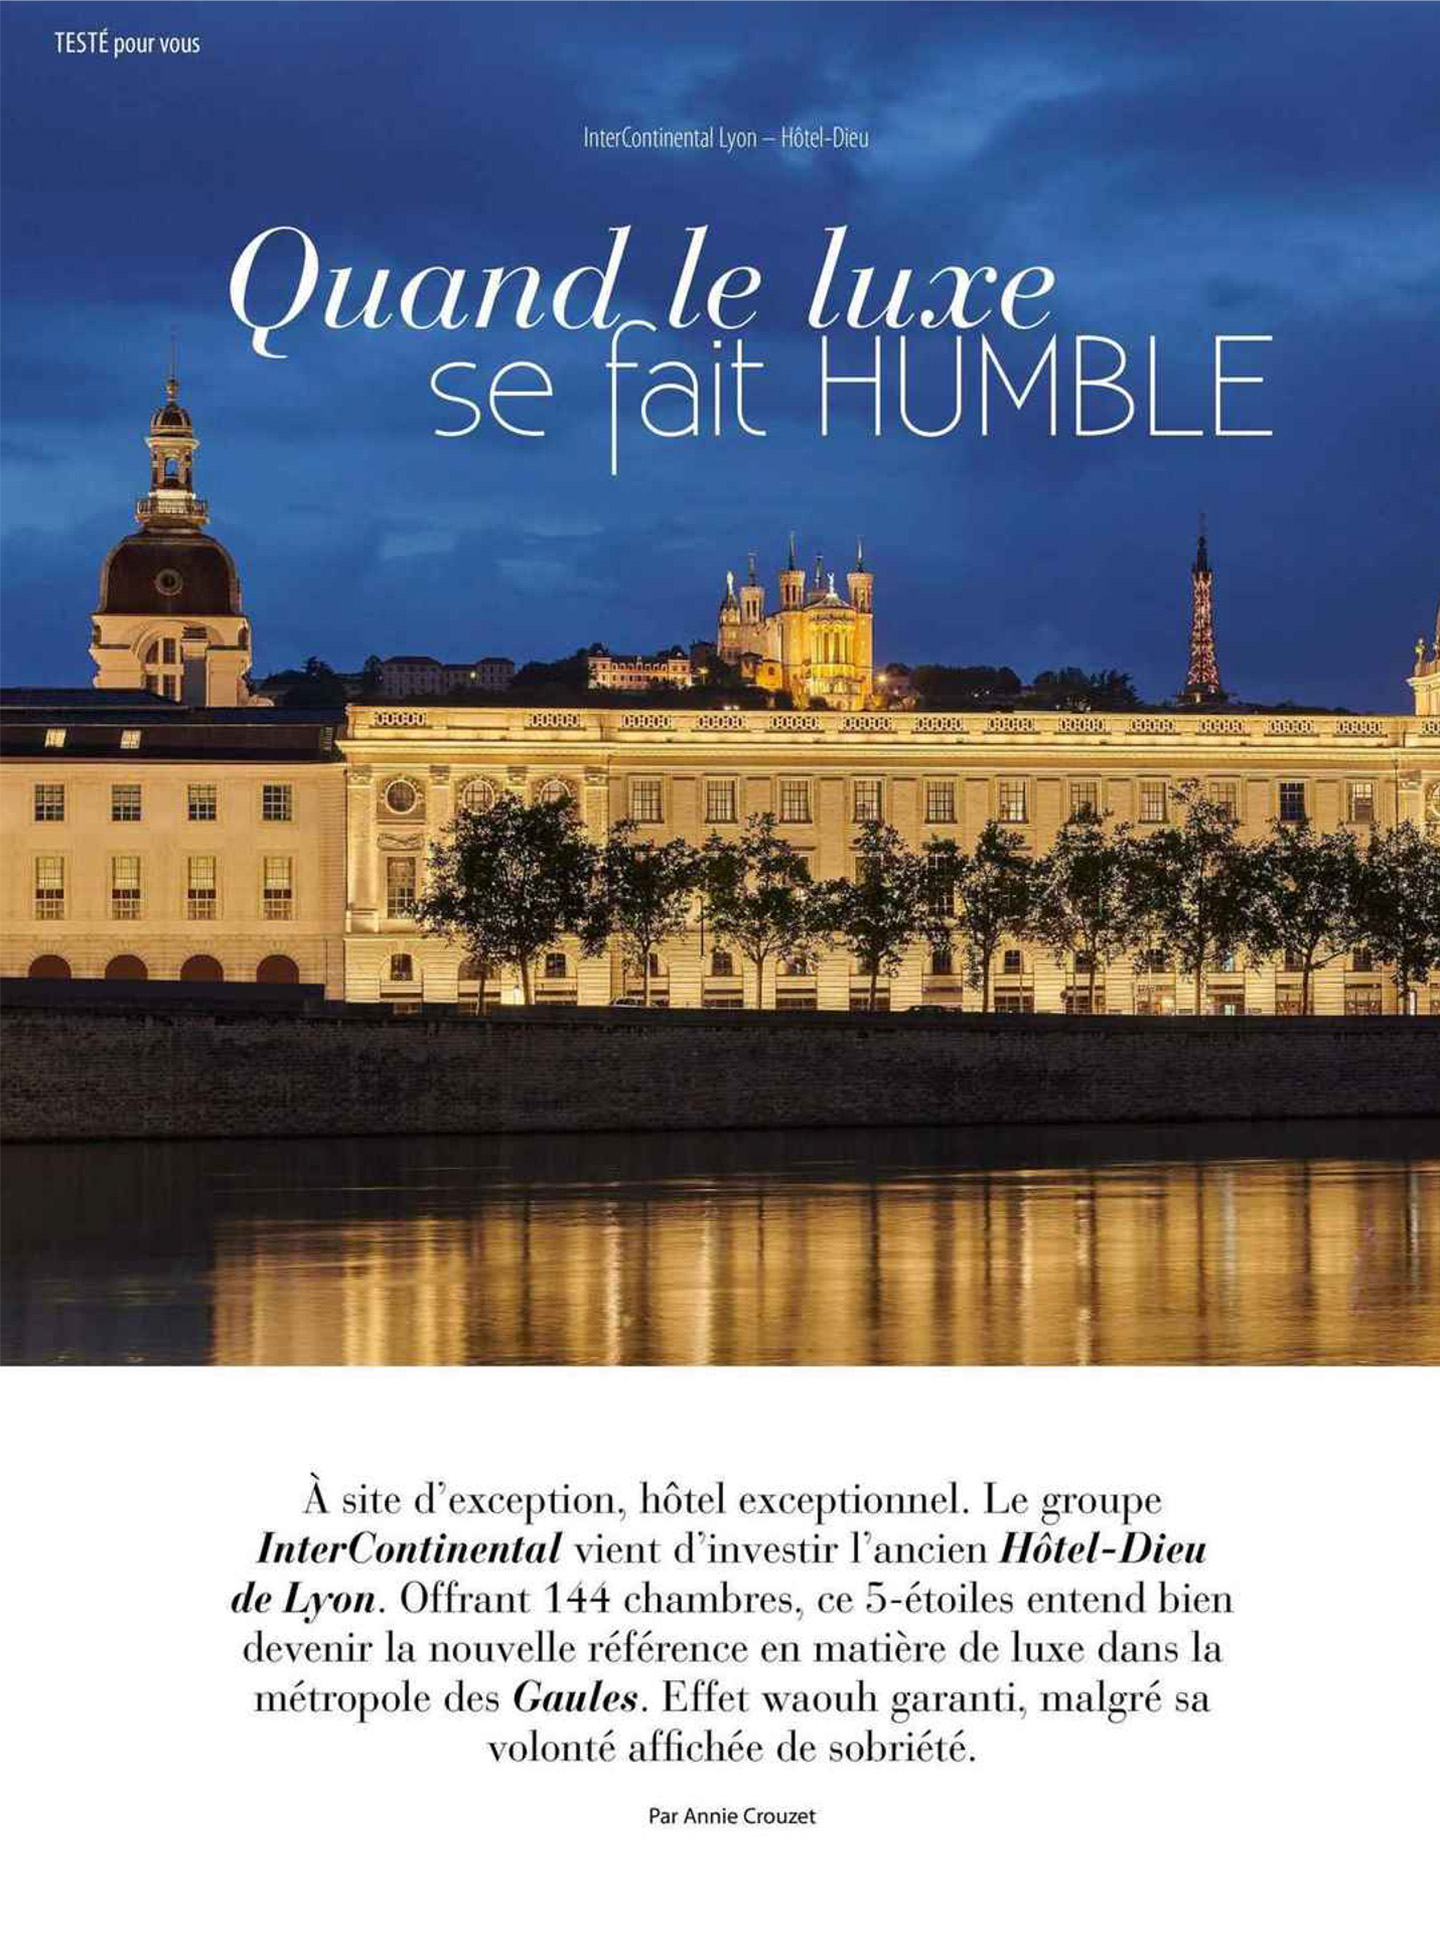 Article on the InterContinental Lyon Hotel Dieu realized by the studio jean-Philippe Nuel in the magazine Voyage de luxe, new luxury hotel, luxury interior design, historical heritage